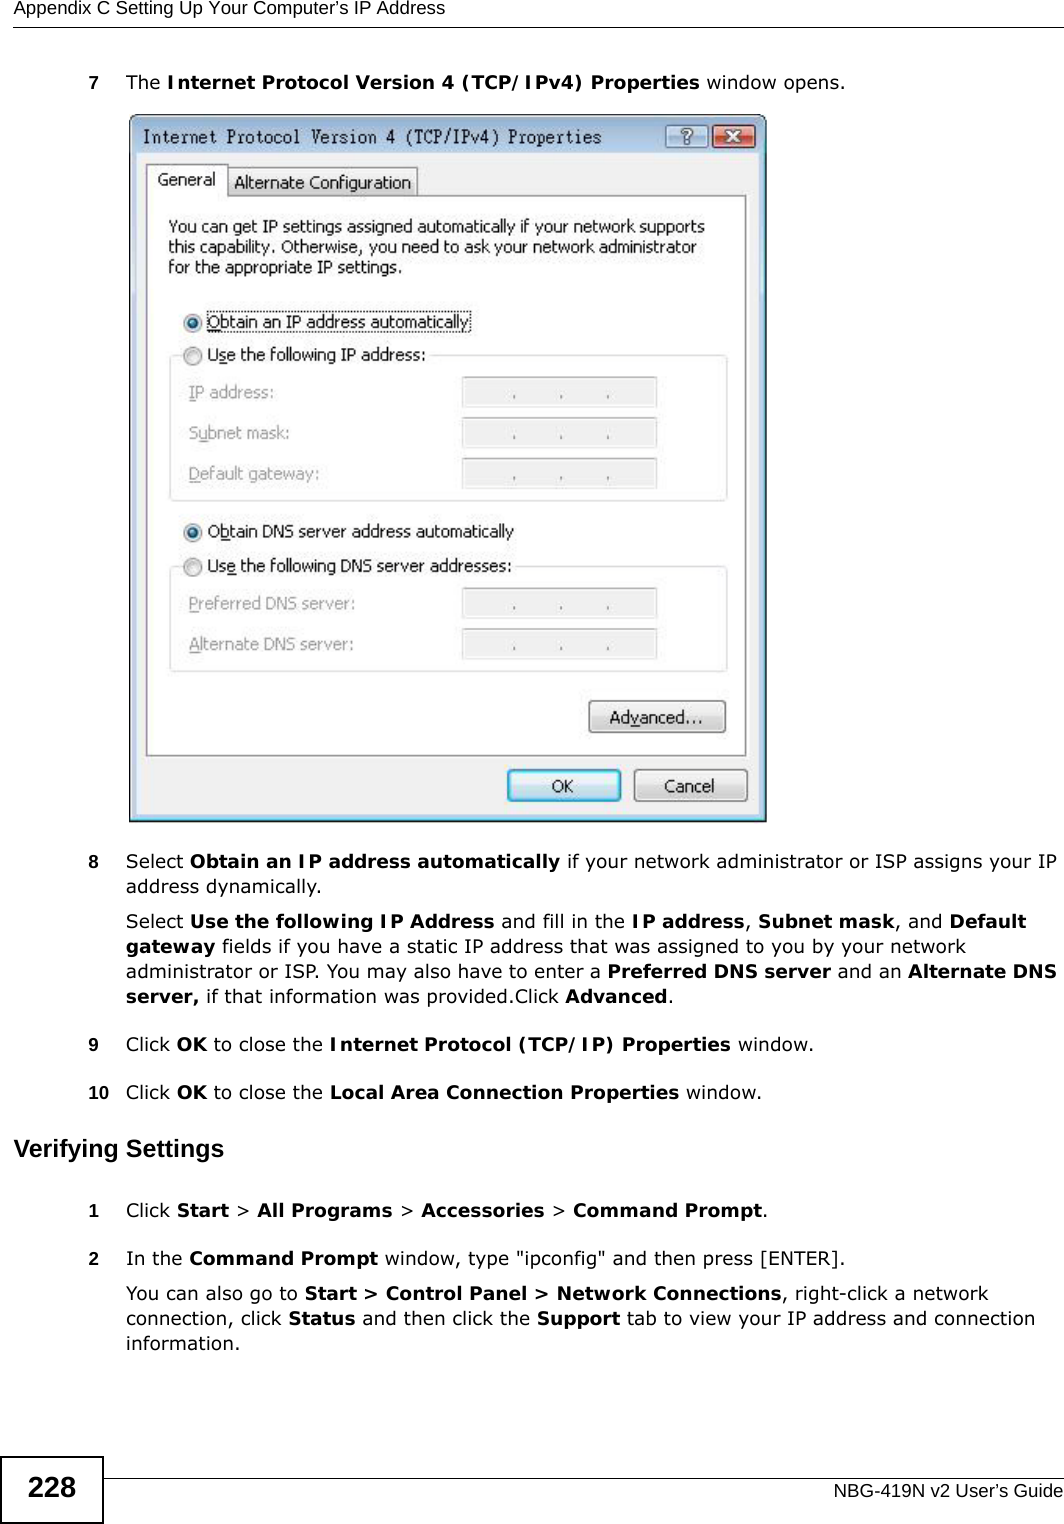 Appendix C Setting Up Your Computer’s IP AddressNBG-419N v2 User’s Guide2287The Internet Protocol Version 4 (TCP/IPv4) Properties window opens.8Select Obtain an IP address automatically if your network administrator or ISP assigns your IP address dynamically.Select Use the following IP Address and fill in the IP address, Subnet mask, and Default gateway fields if you have a static IP address that was assigned to you by your network administrator or ISP. You may also have to enter a Preferred DNS server and an Alternate DNS server, if that information was provided.Click Advanced.9Click OK to close the Internet Protocol (TCP/IP) Properties window.10 Click OK to close the Local Area Connection Properties window.Verifying Settings1Click Start &gt; All Programs &gt; Accessories &gt; Command Prompt.2In the Command Prompt window, type &quot;ipconfig&quot; and then press [ENTER]. You can also go to Start &gt; Control Panel &gt; Network Connections, right-click a network connection, click Status and then click the Support tab to view your IP address and connection information.